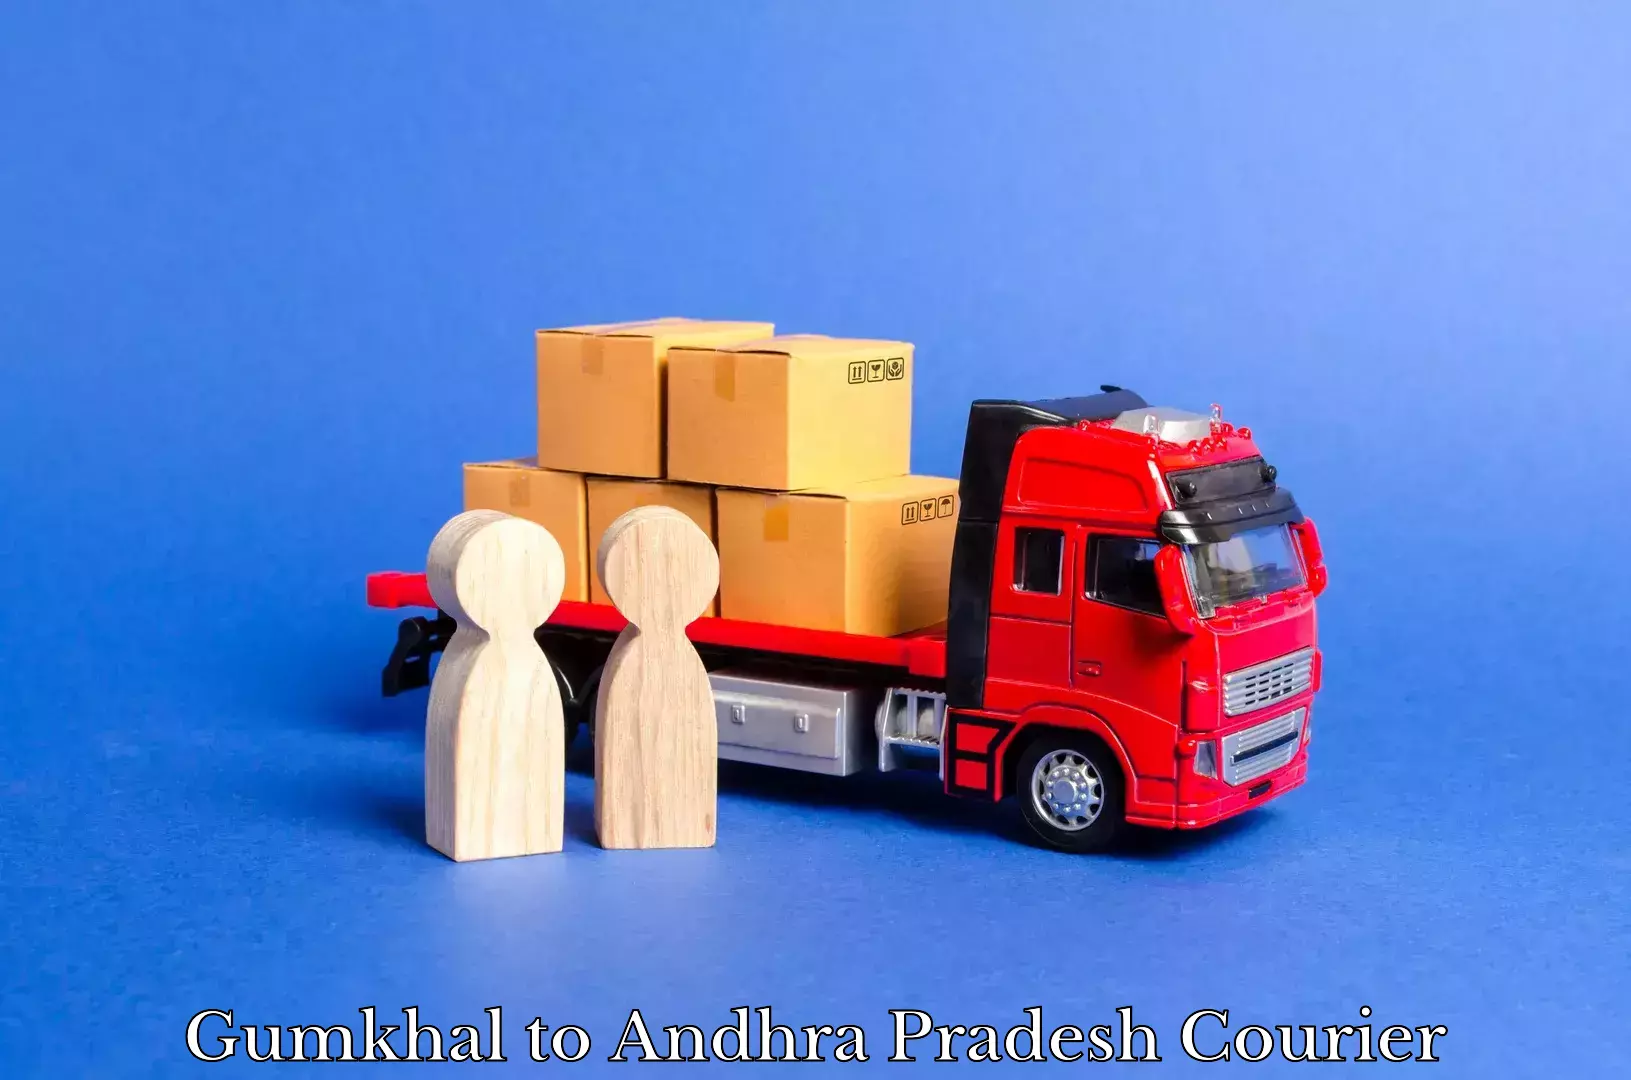 State-of-the-art courier technology Gumkhal to Andhra Pradesh